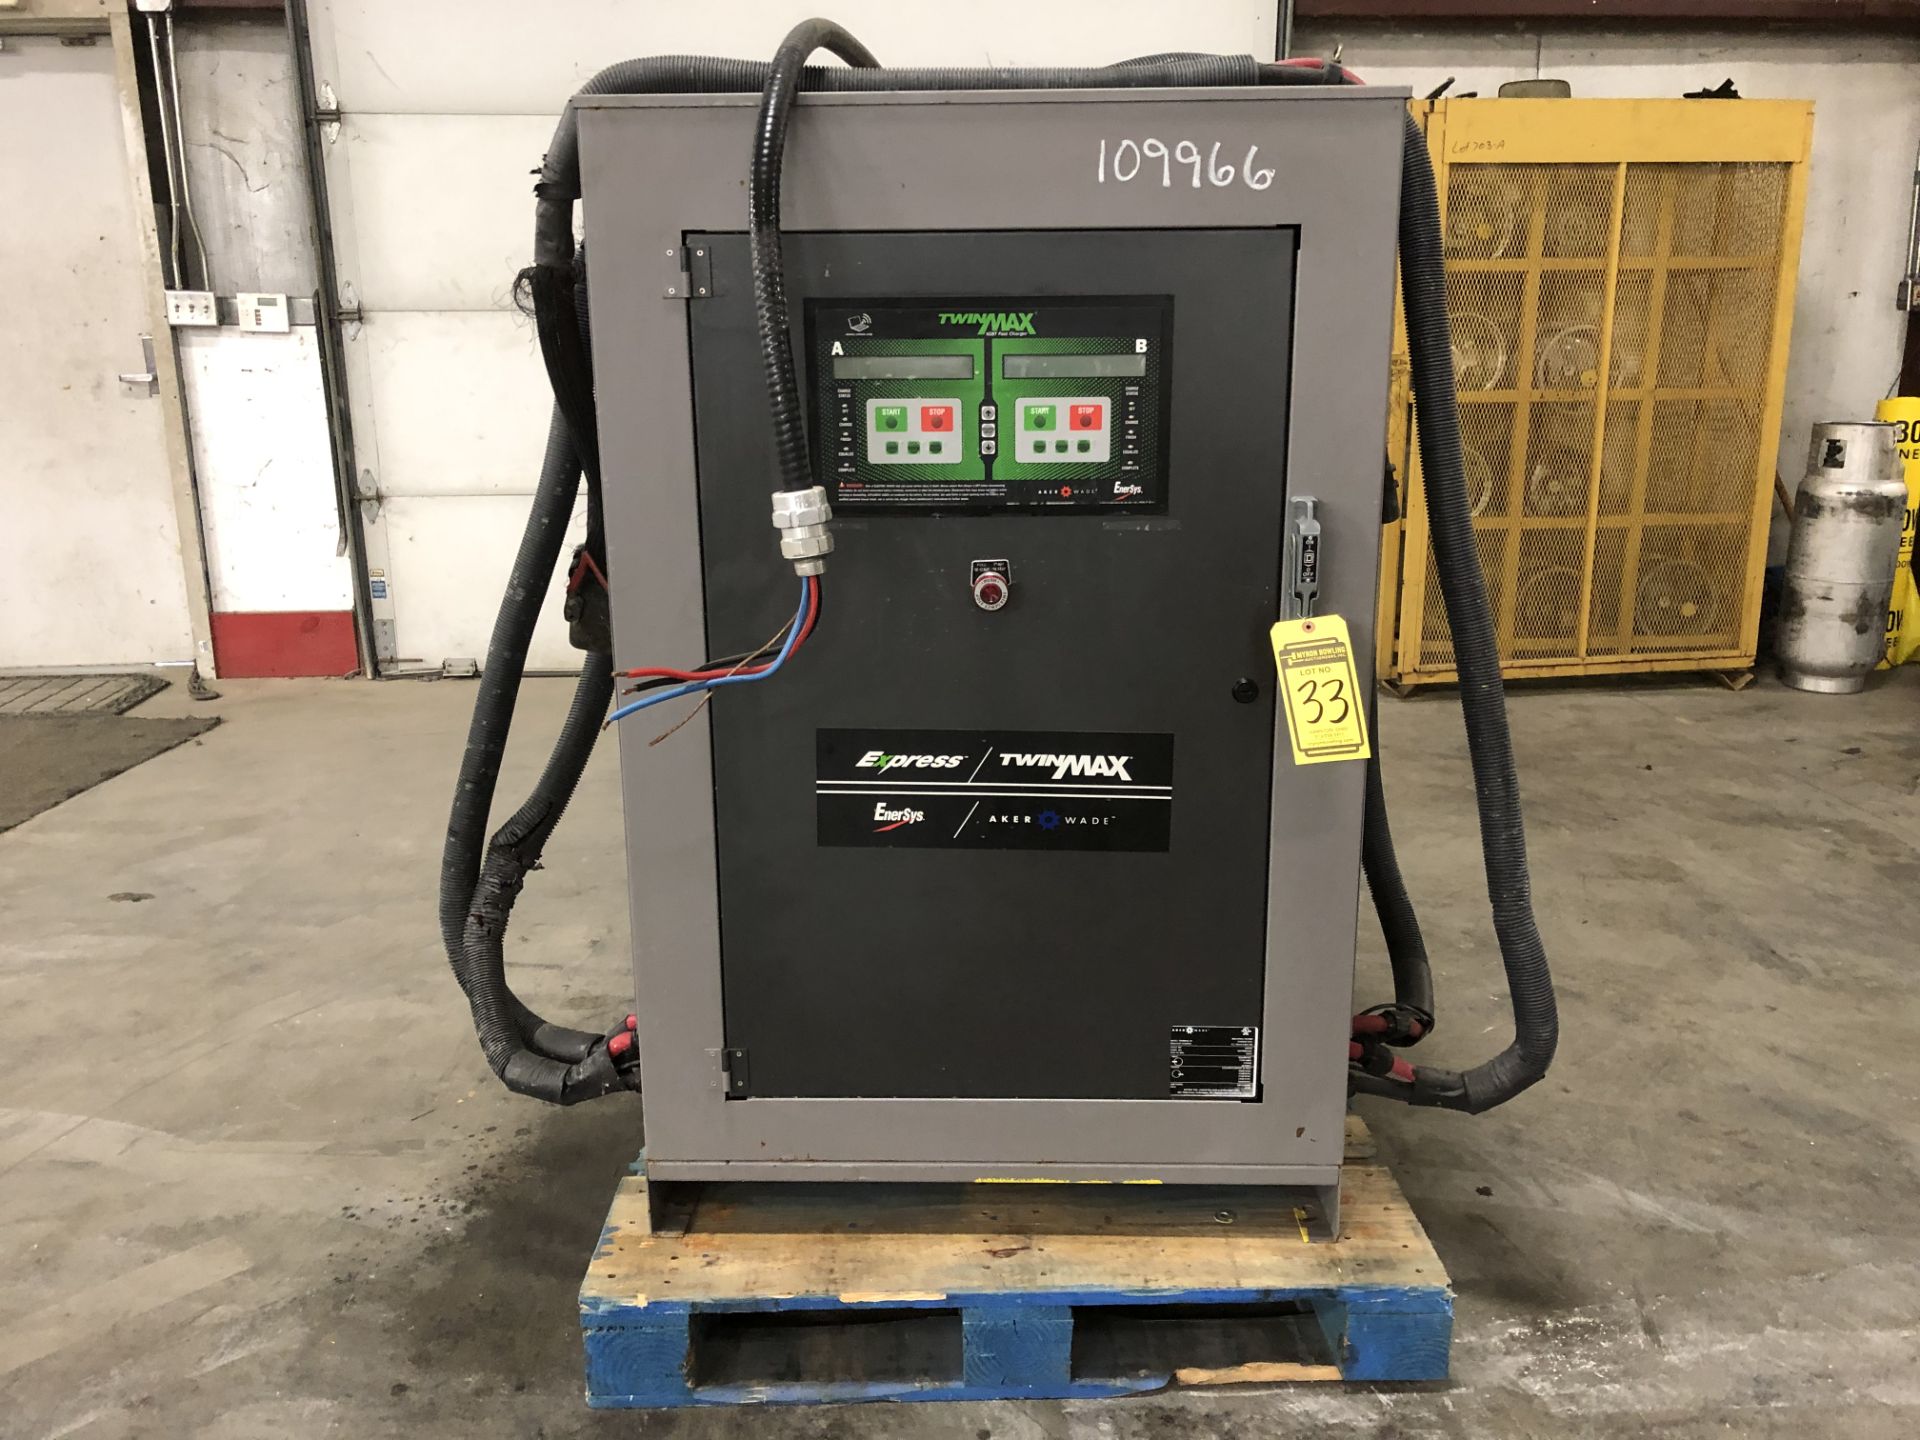 2014 ENERSYS EXPRESS MULTI-VOLT INDUSTRIAL BATTERY CHARGER, MODEL: TWINMAX 20, S/N: TM20N001828,